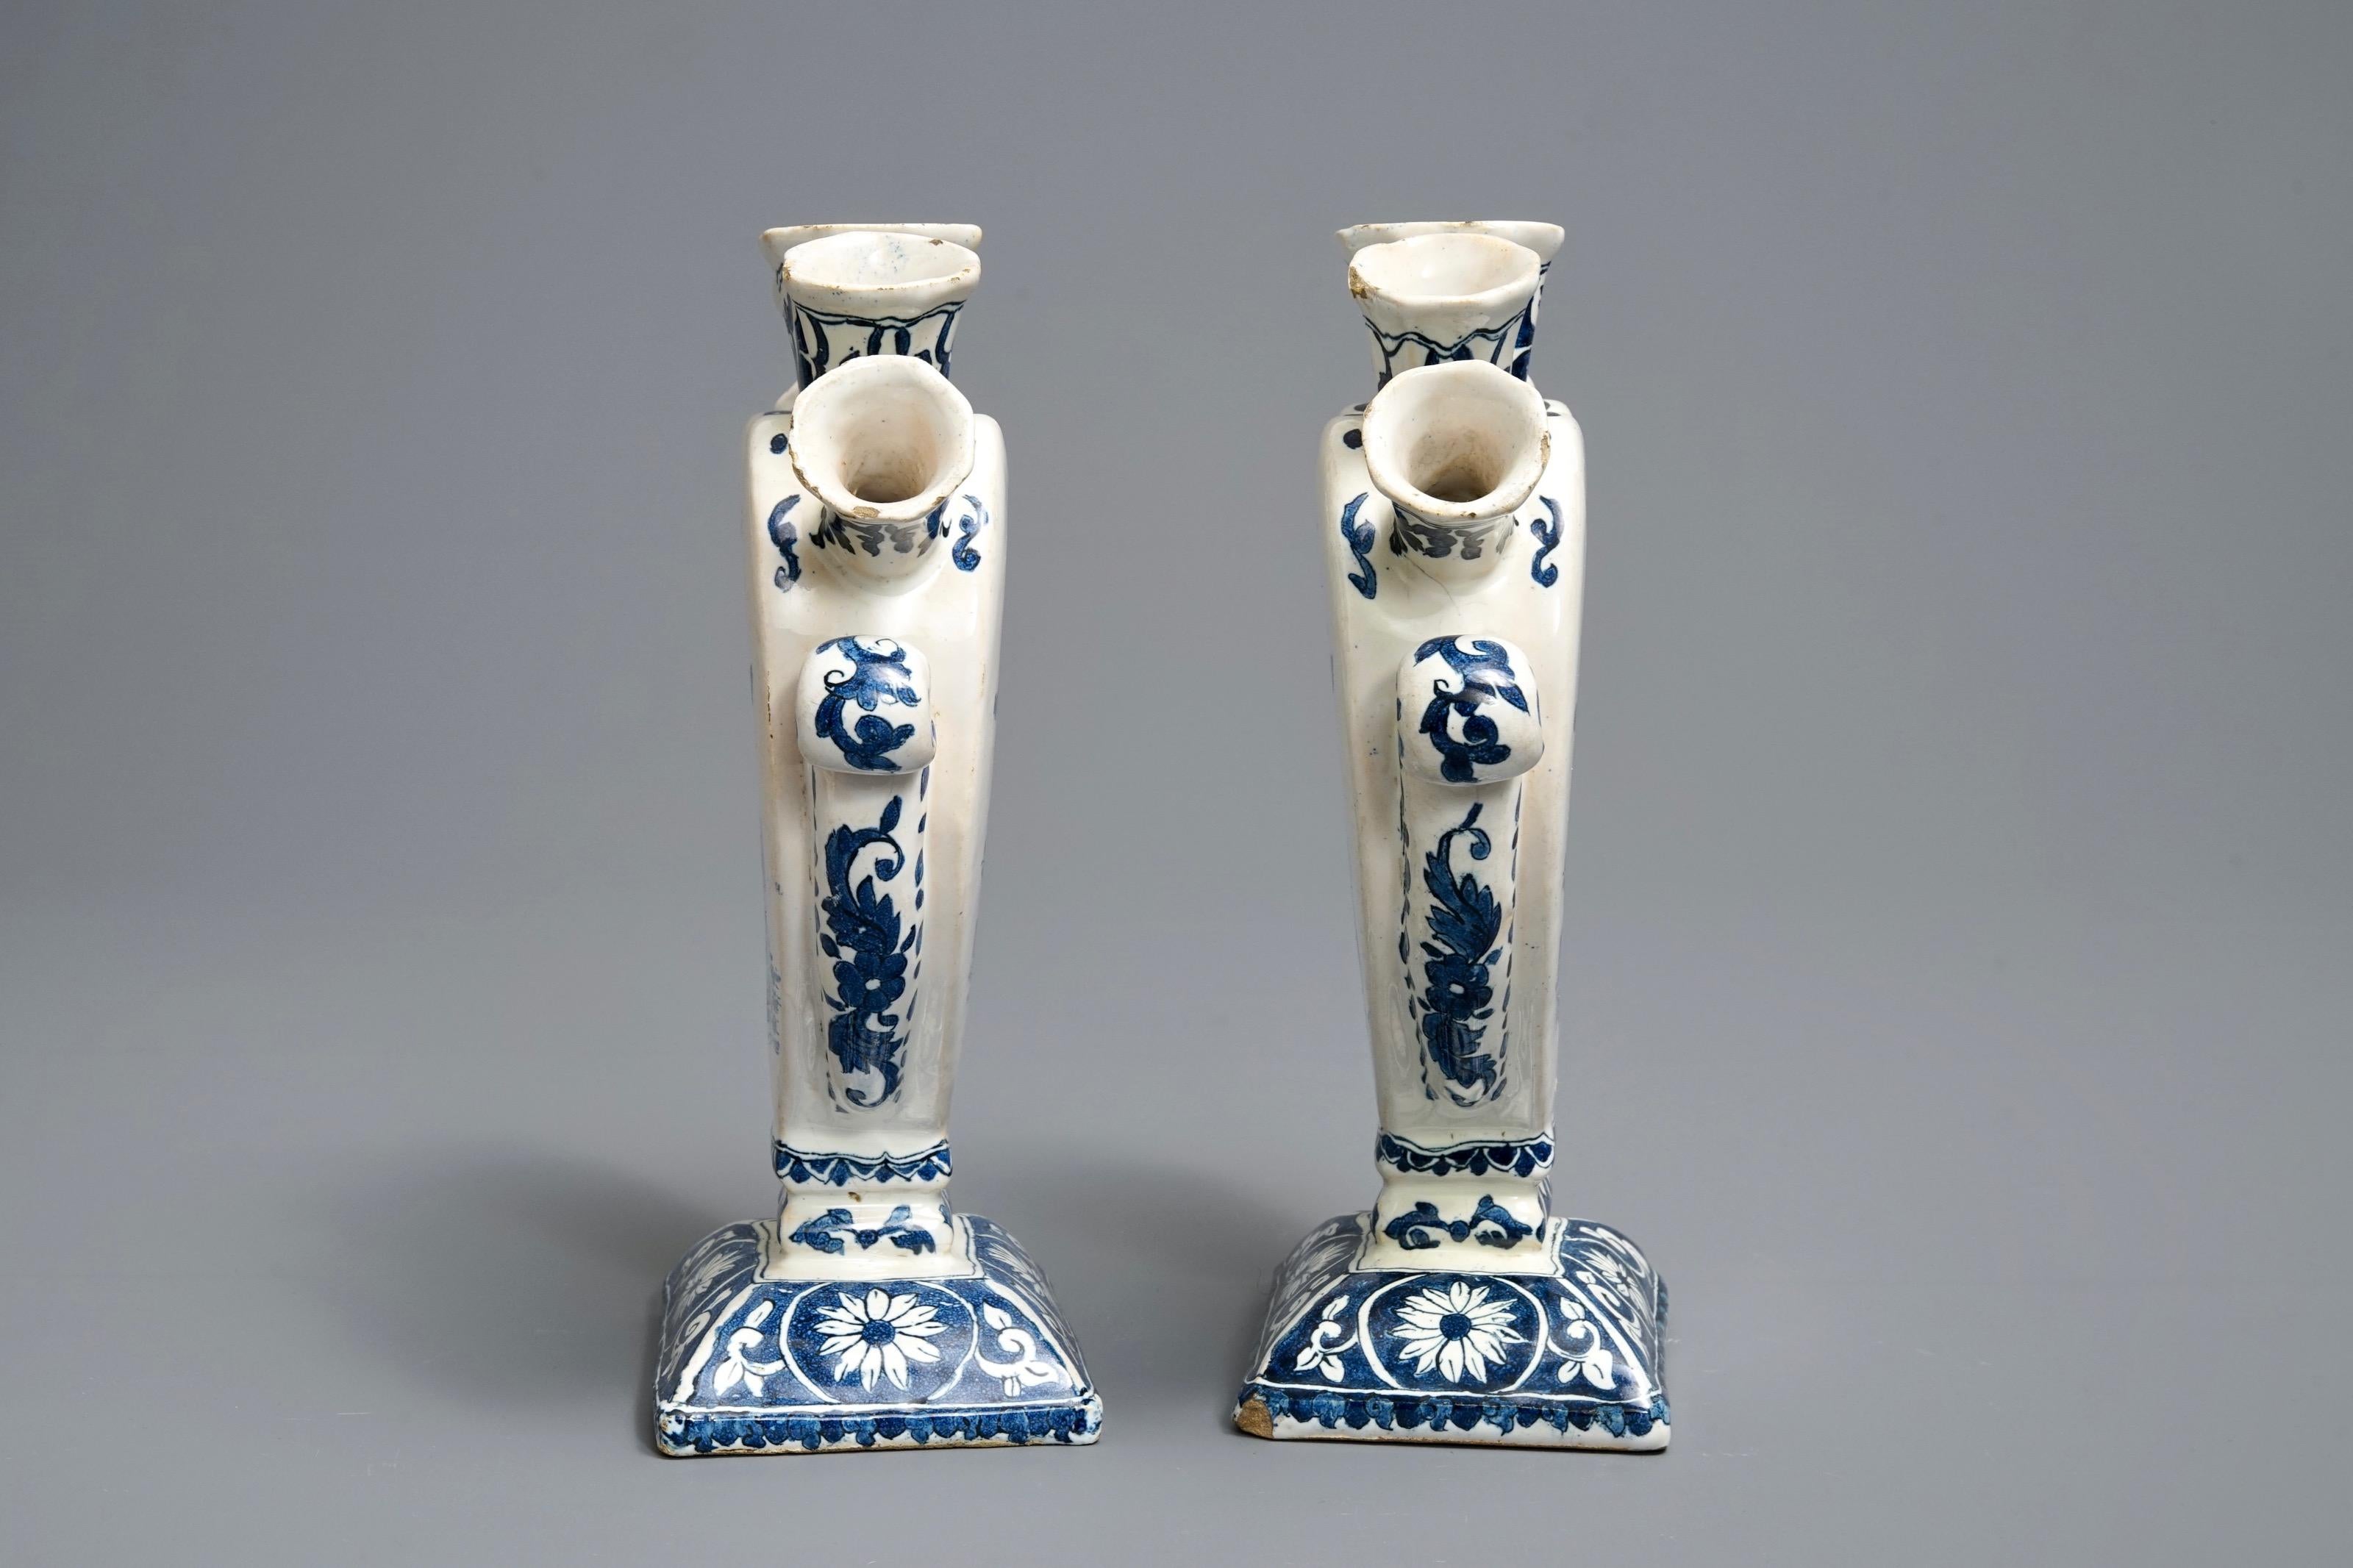 A pair of two Dutch Delft tulip vases or tulipieres
The Netherlands
19th century

A pair of two Dutch Delft, heart-shaped, tulip vases dating from the 19th century. Special about these vases is that they are still a set of two, and not have been